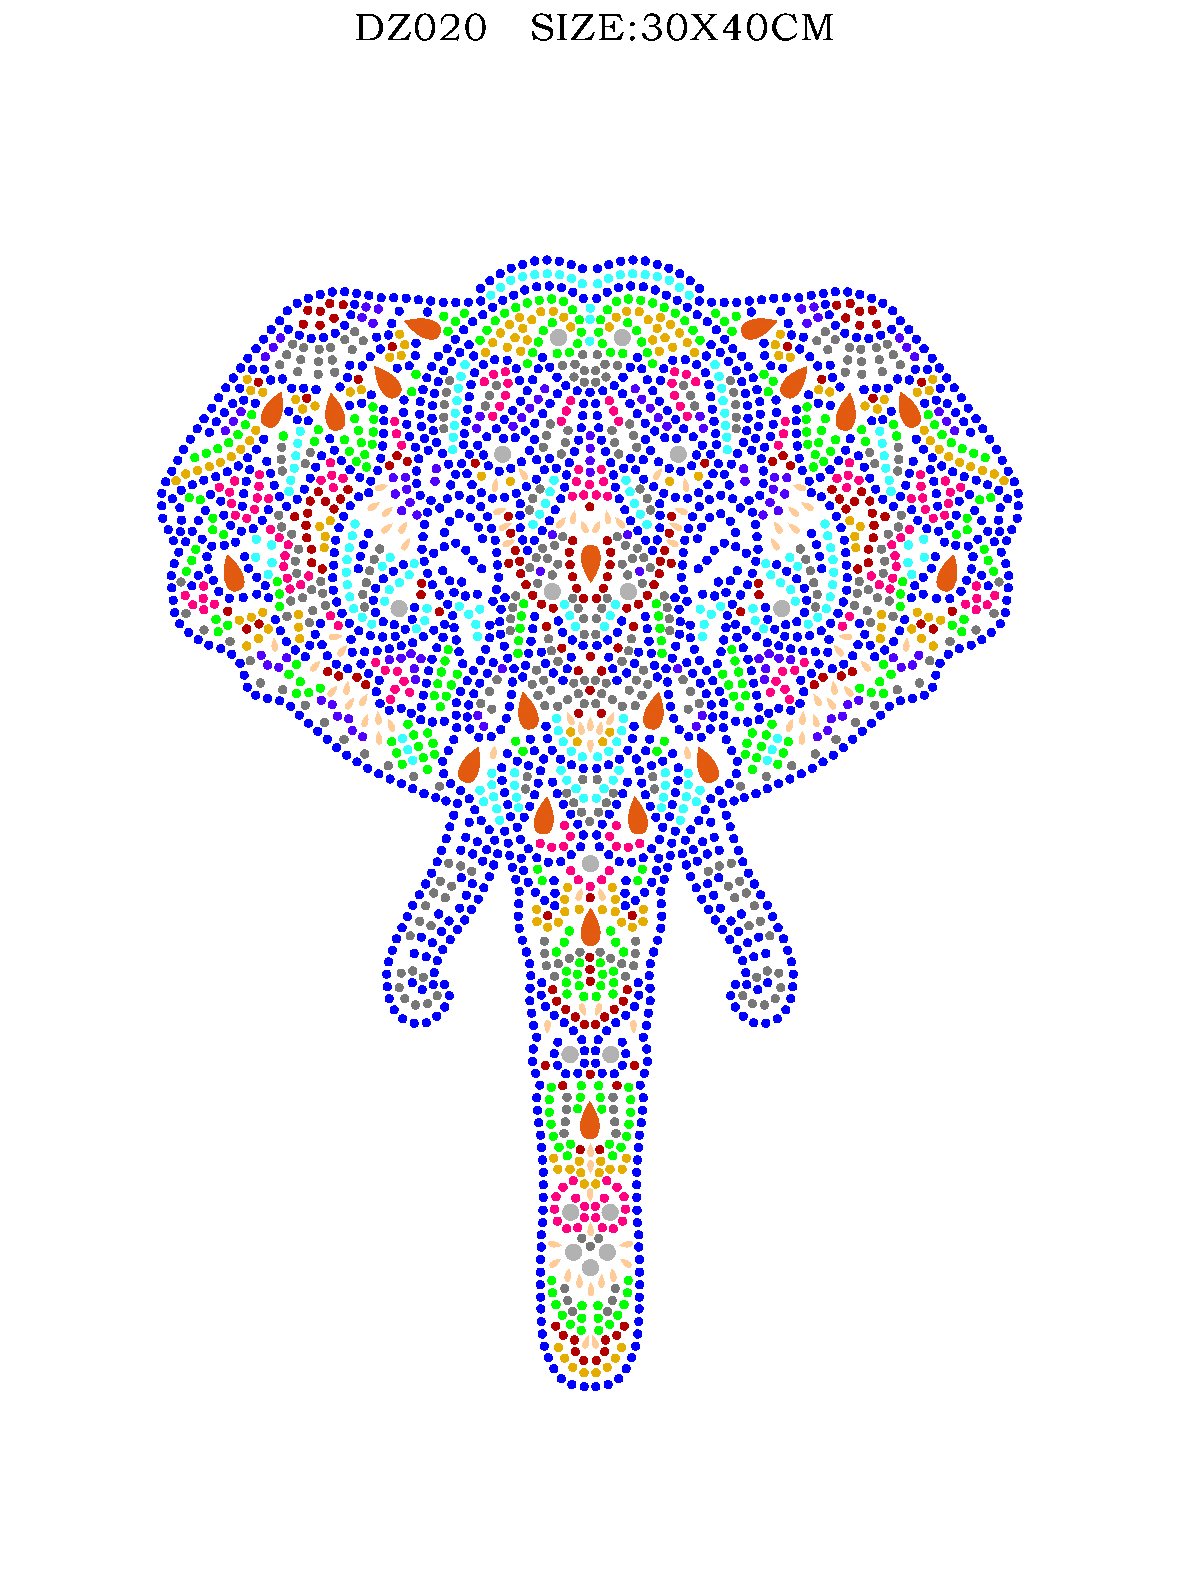 Abstract Elephant